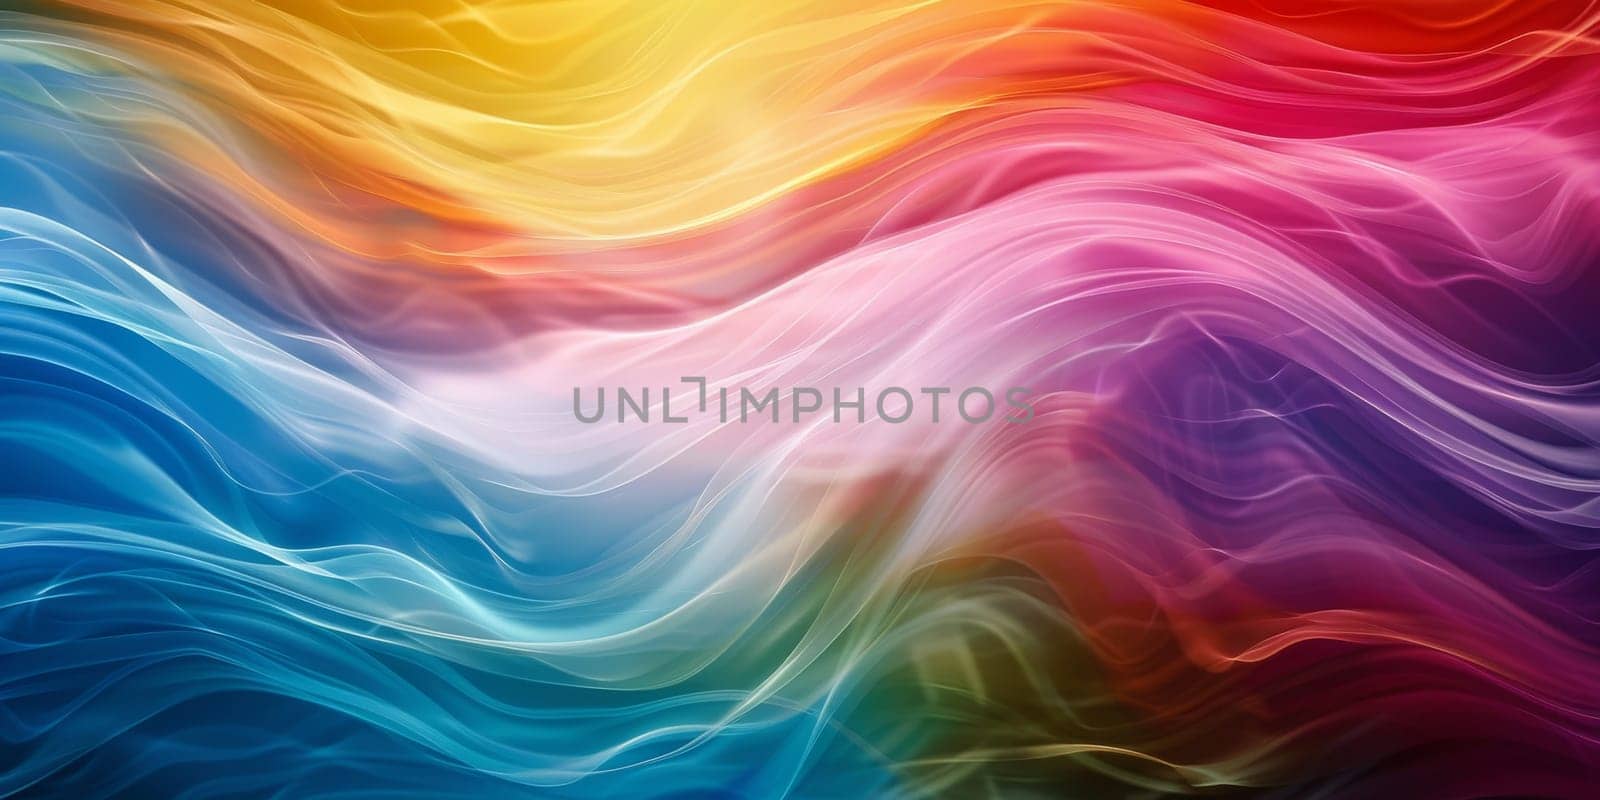 Colorful rainbow background with flowing wavy lines in various hues and shades by Kadula